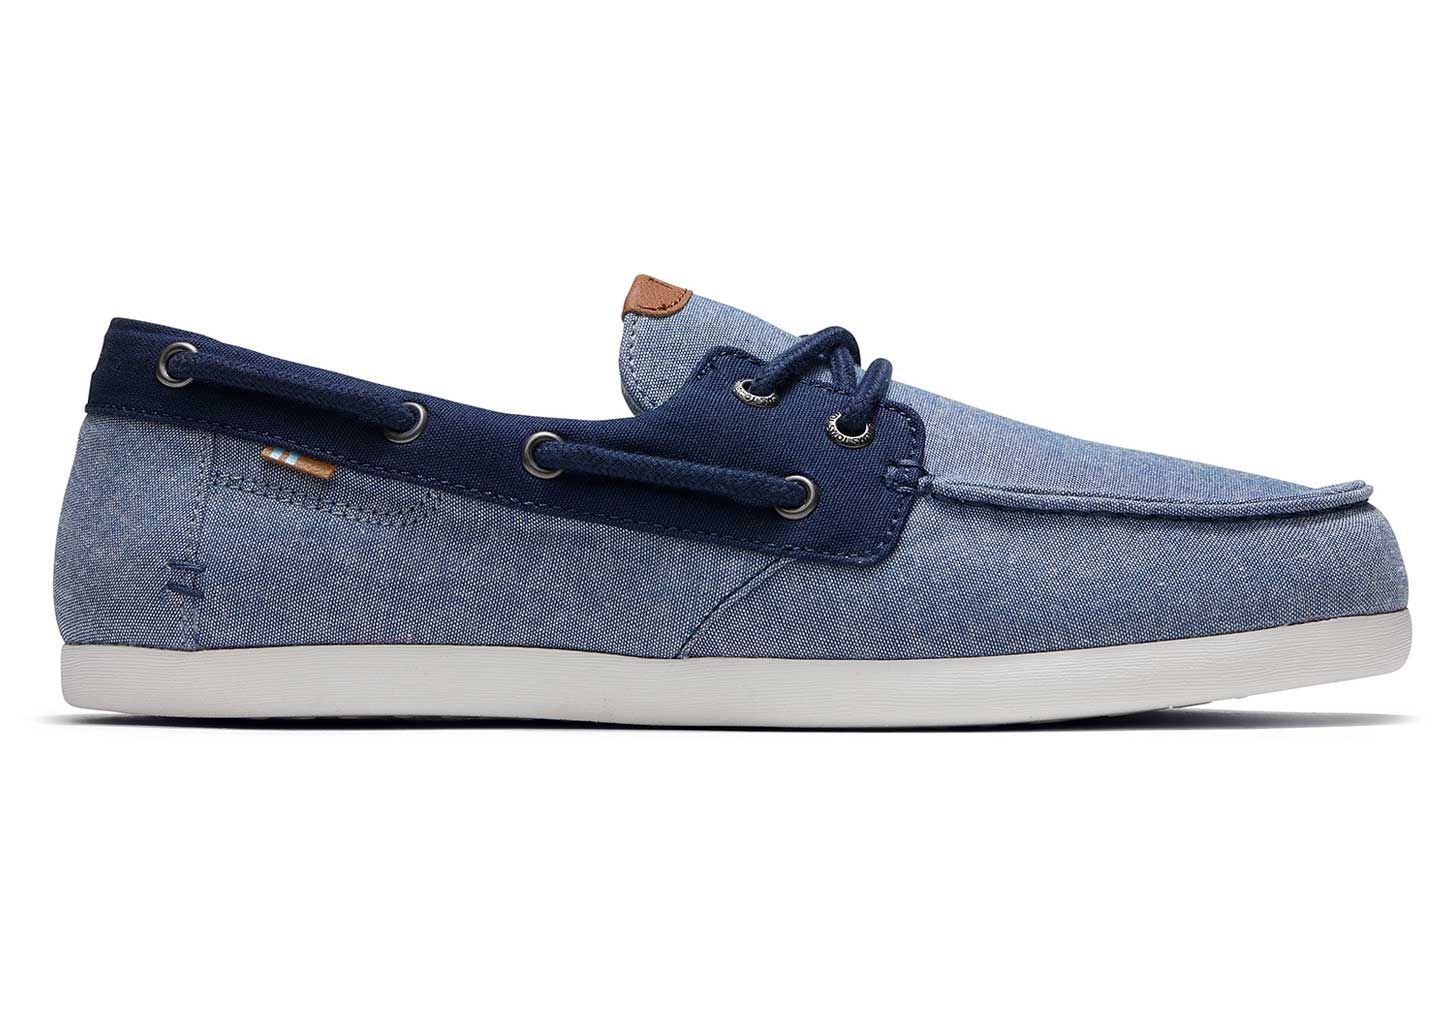 TOMS Men's Navy Blue Chambray Claremont Boat Shoe Slip-On Shoes | TOMS (US)